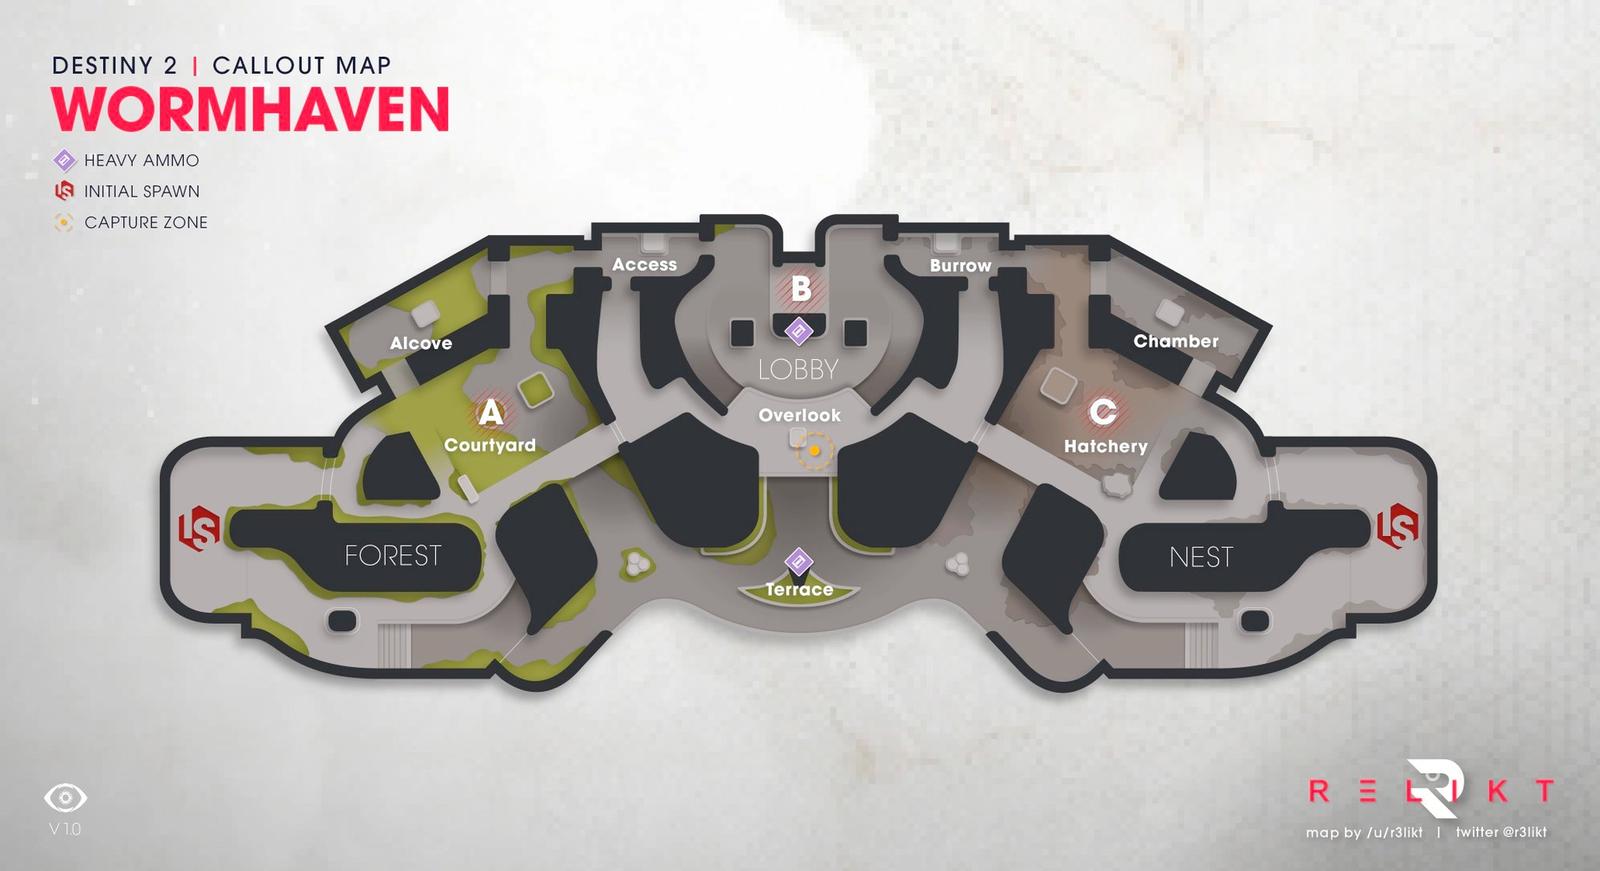 Wormhaven callout map by Relikt 